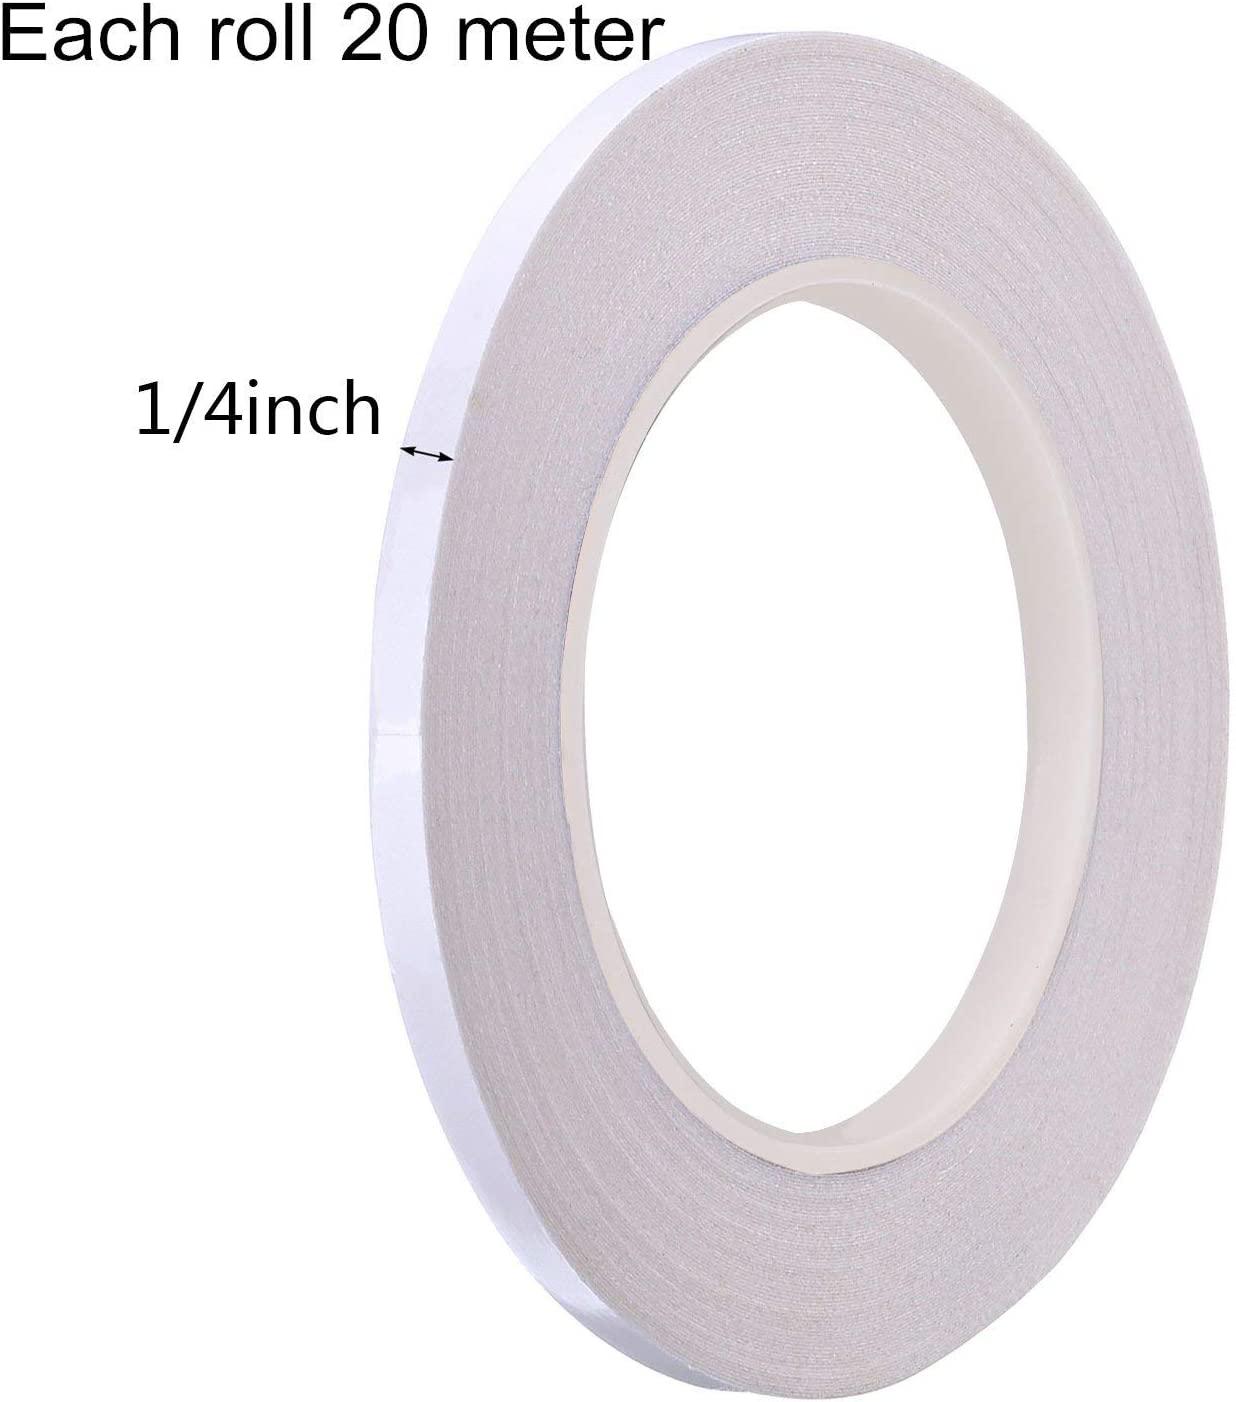 Hotop 1/4 Inch Quilting Sewing Tape Wash Away Tape, Each 22 Yard (2 Rolls)  Original version